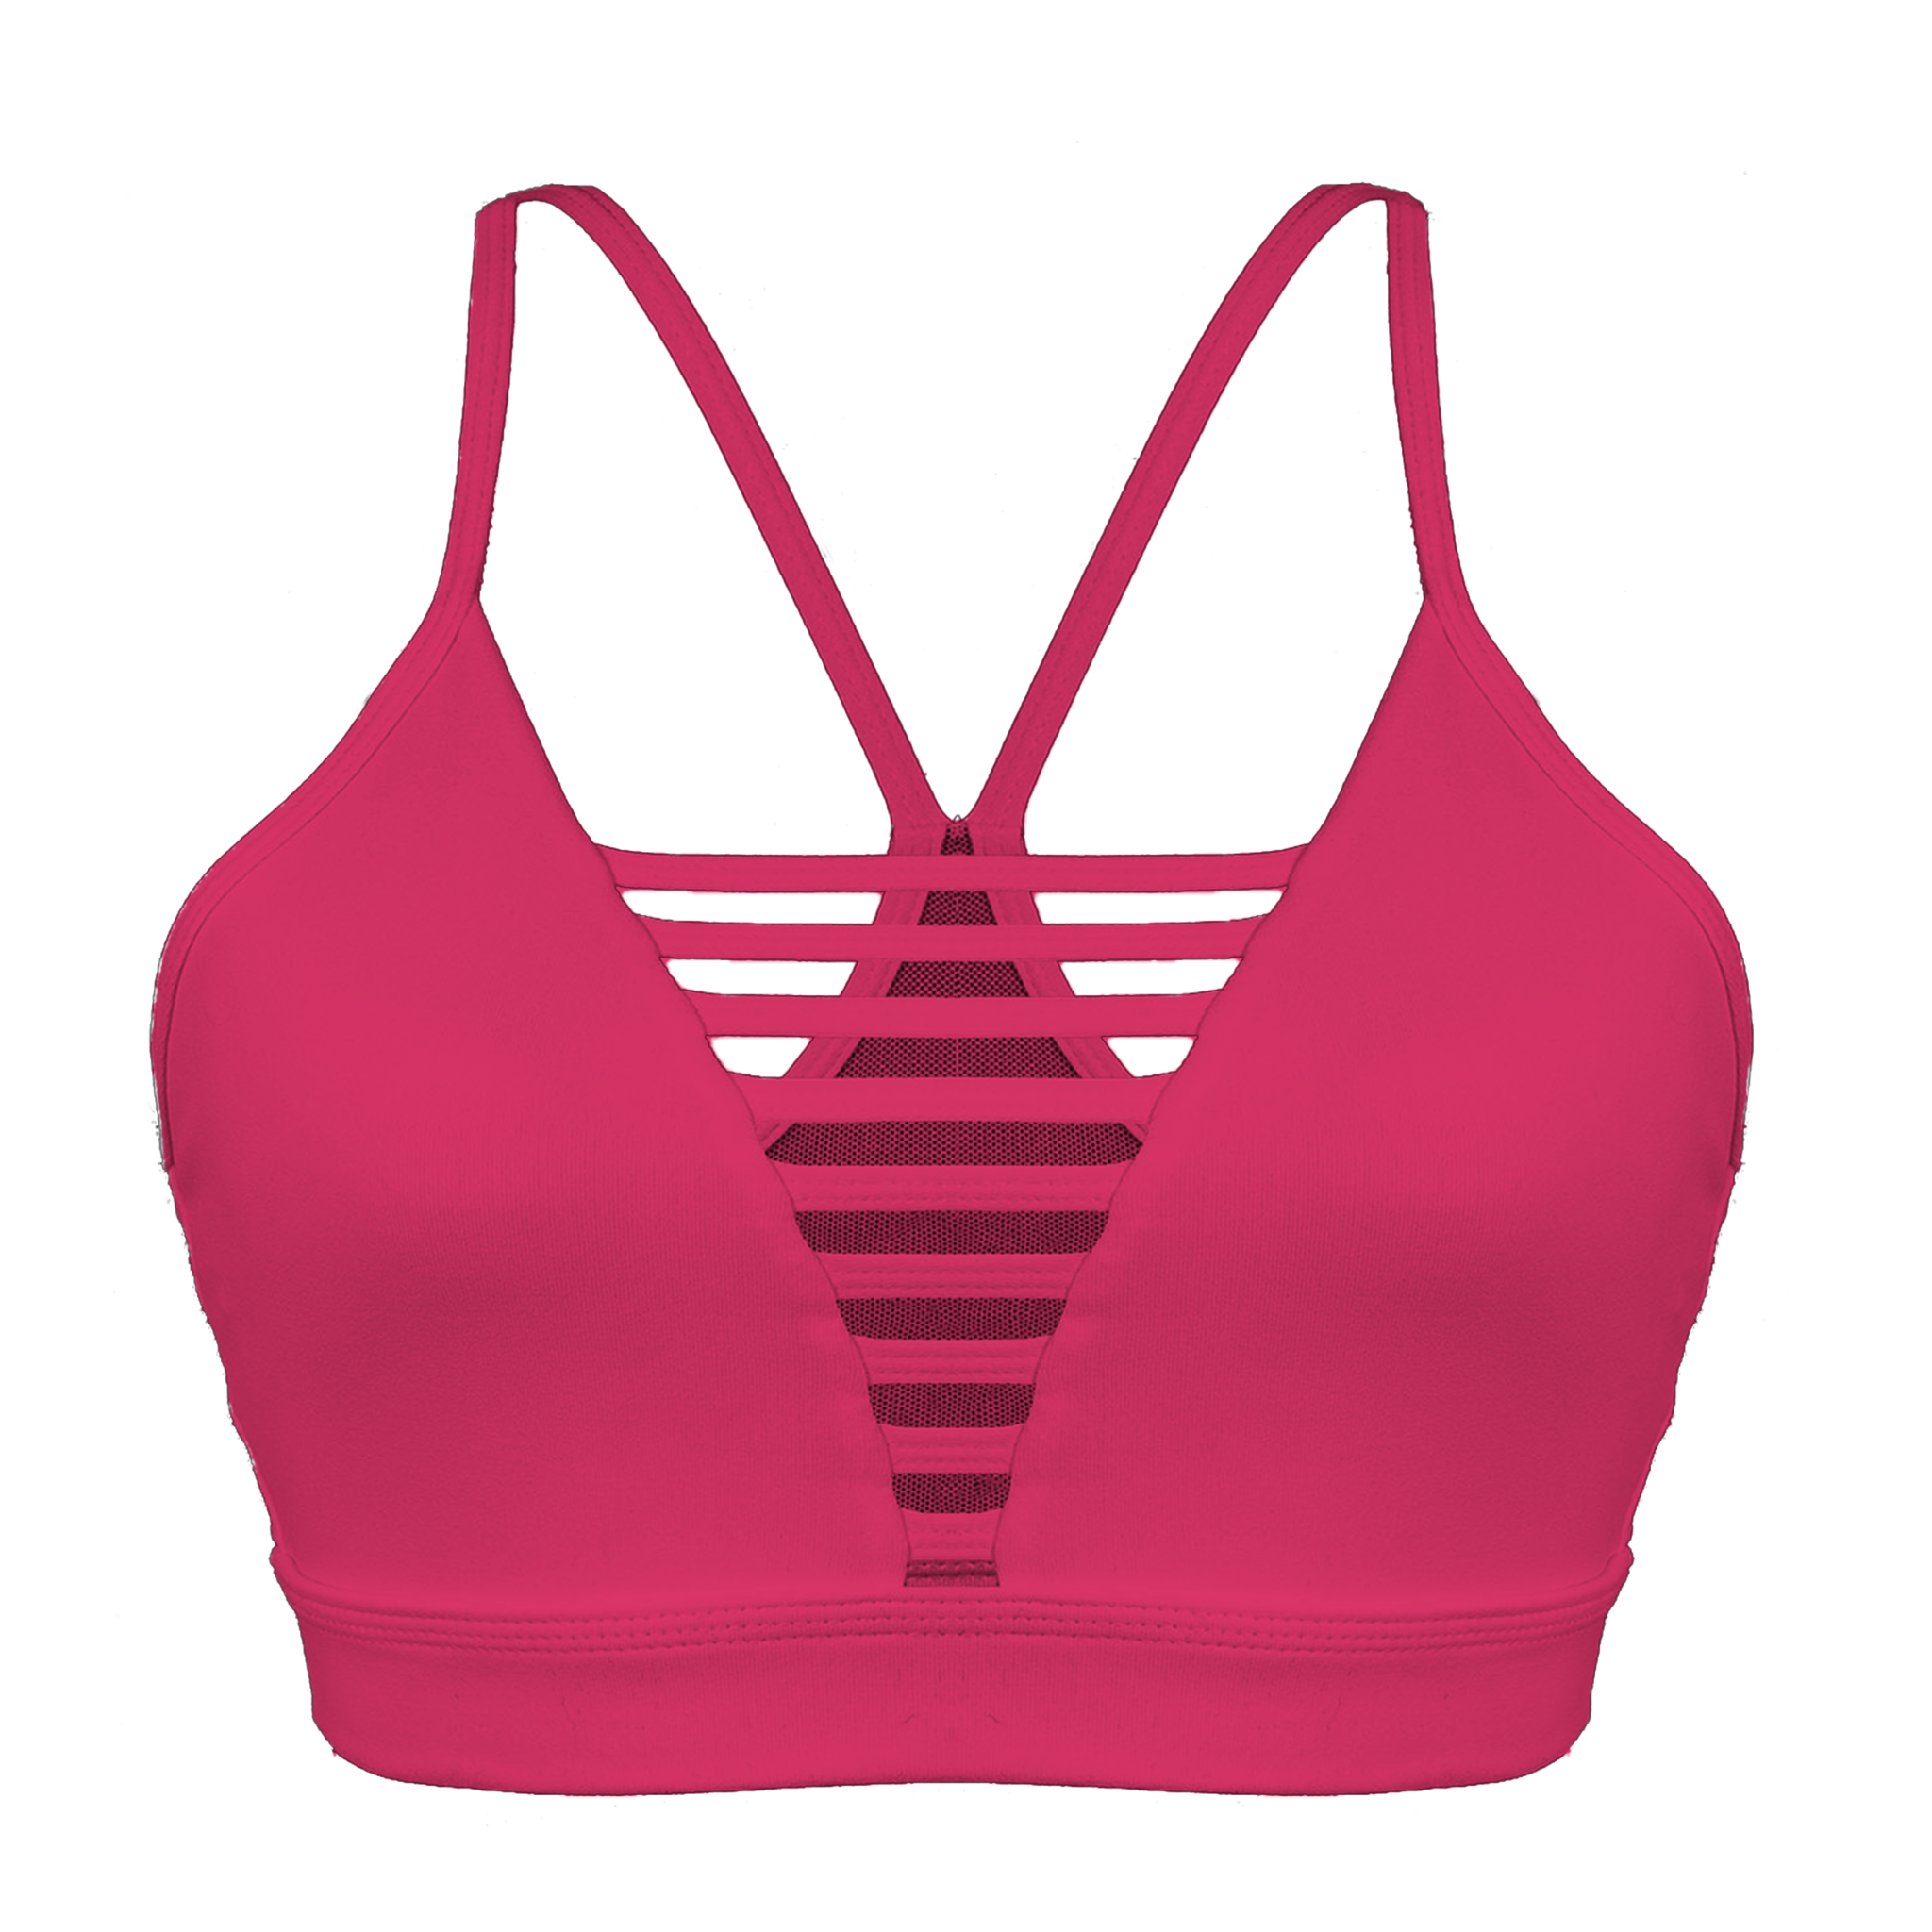 Evolution Sports Bra - Solid Hot Pink– The Barbell Cartel